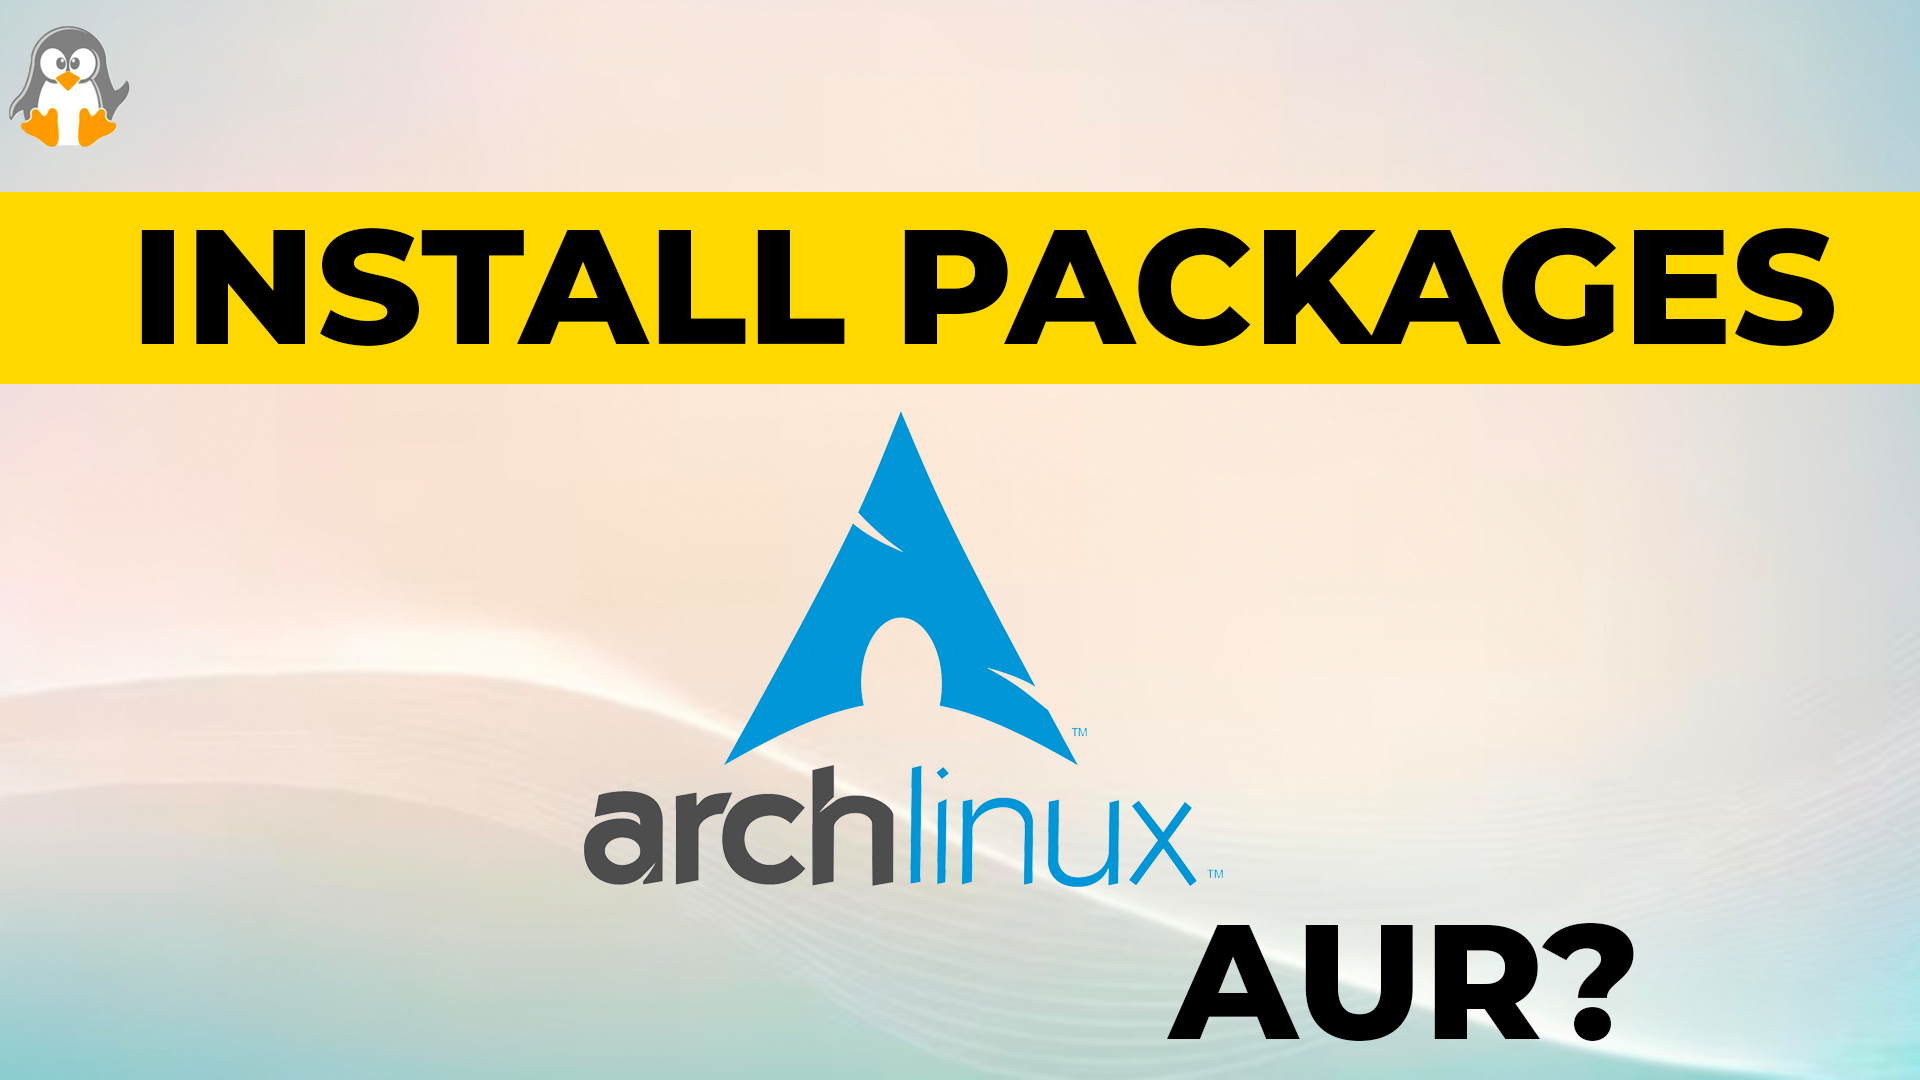 How to Install AUR Packages on Arch Linux?